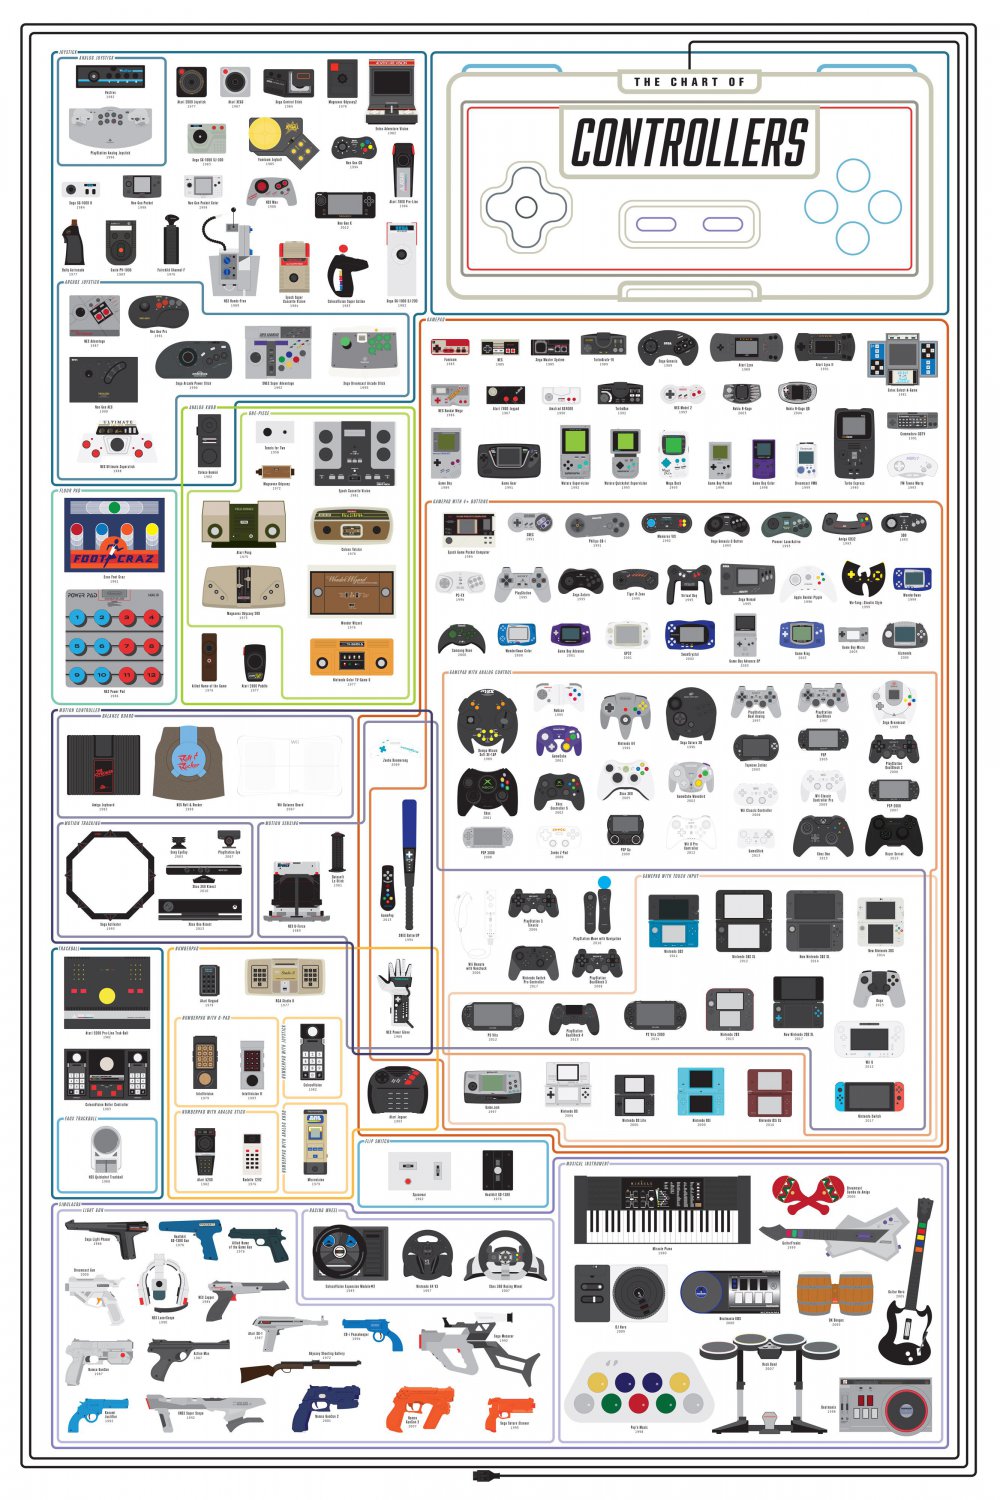 The Chart of Controllers  28"x40" (70cm/100cm) Poster